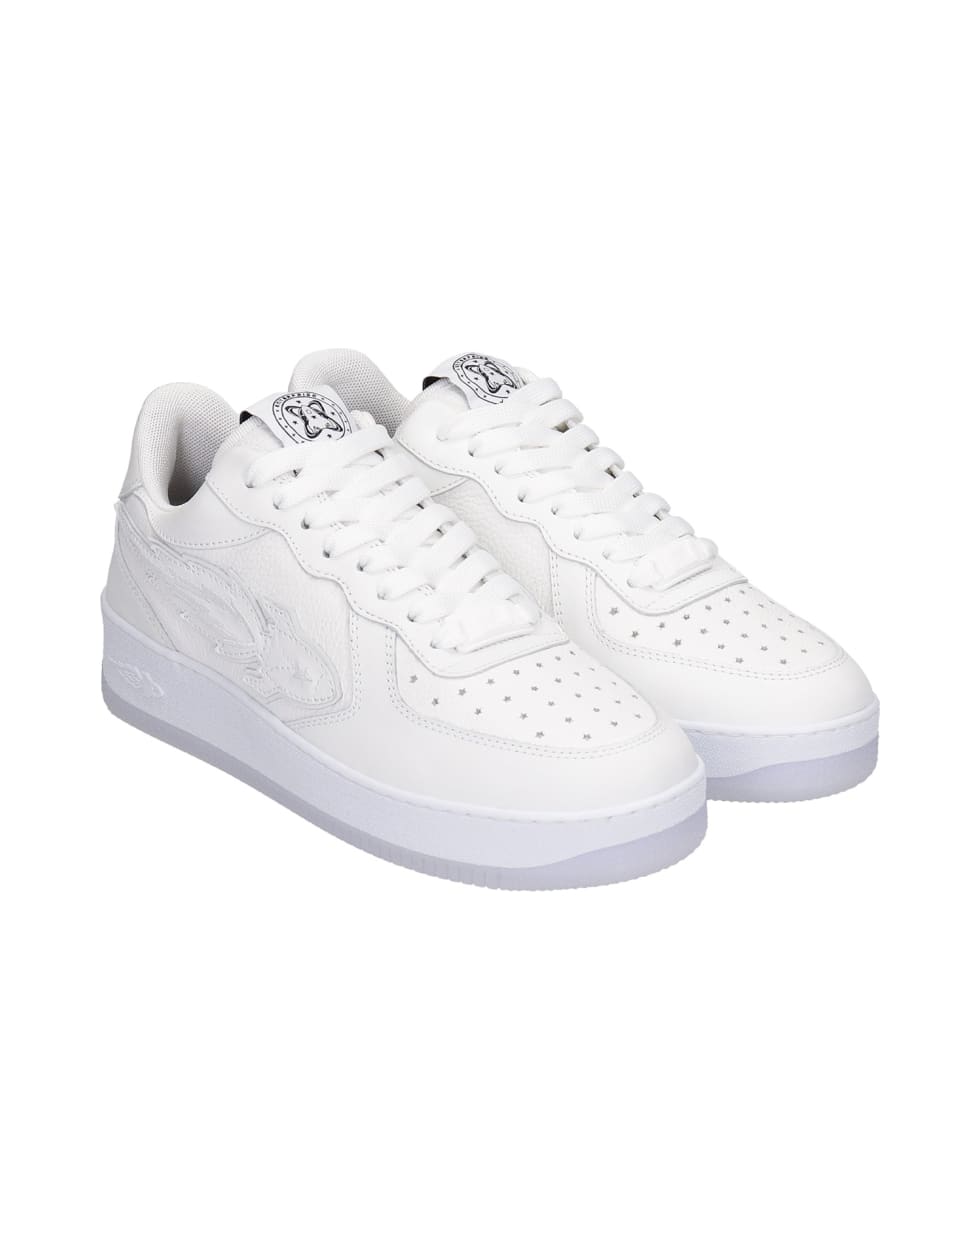 Enterprise Japan Sneakers In White Leather - white